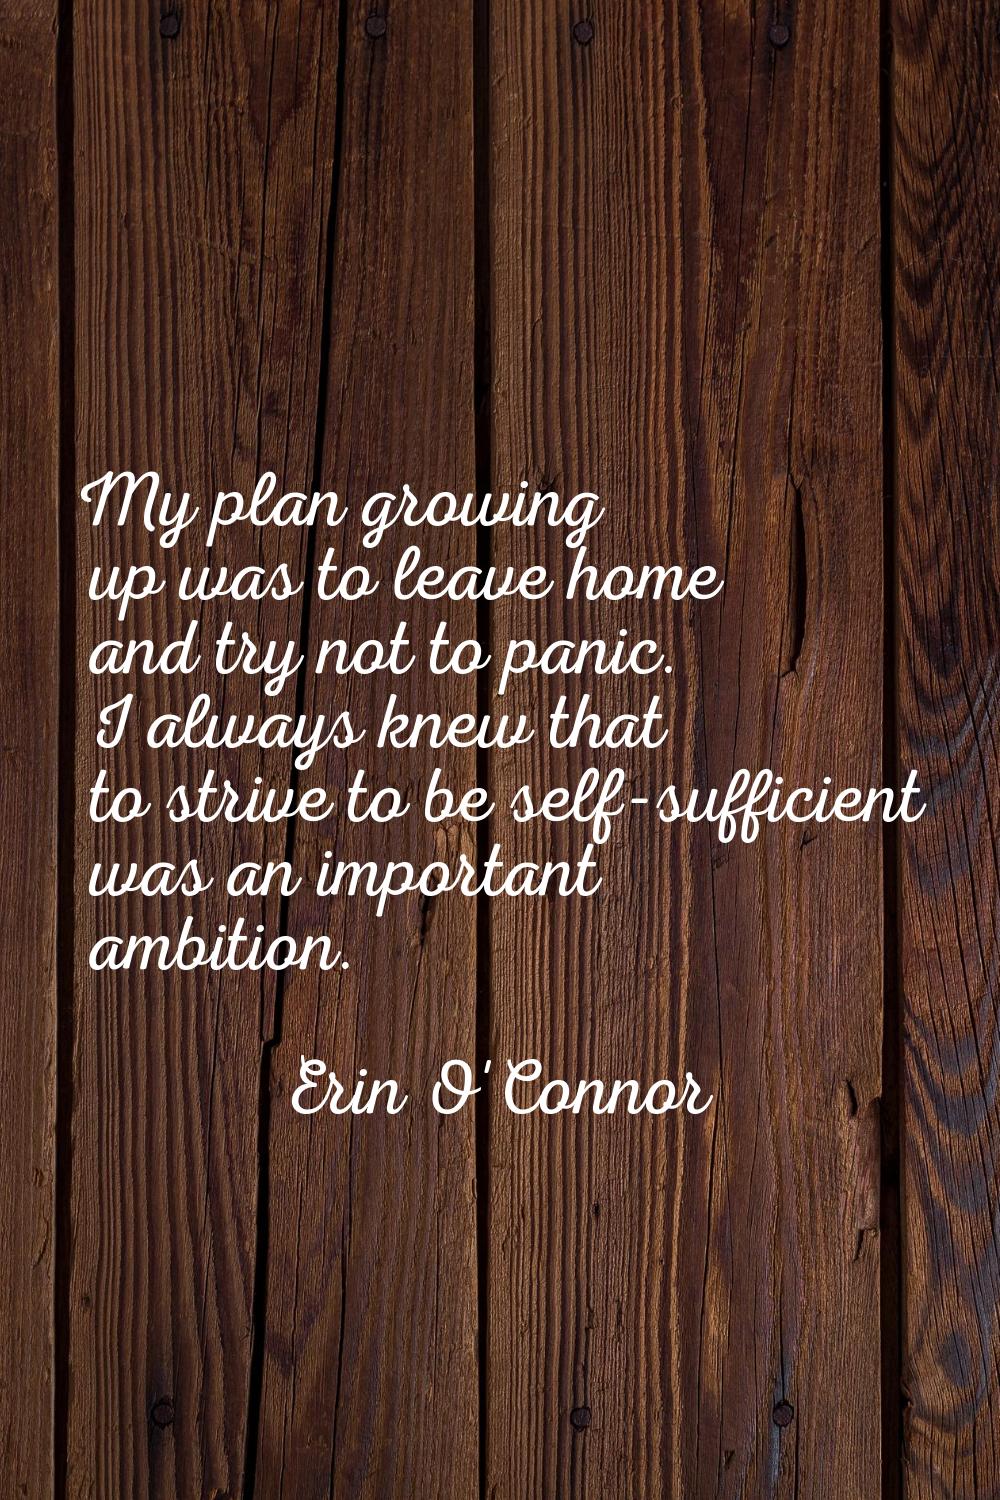 My plan growing up was to leave home and try not to panic. I always knew that to strive to be self-